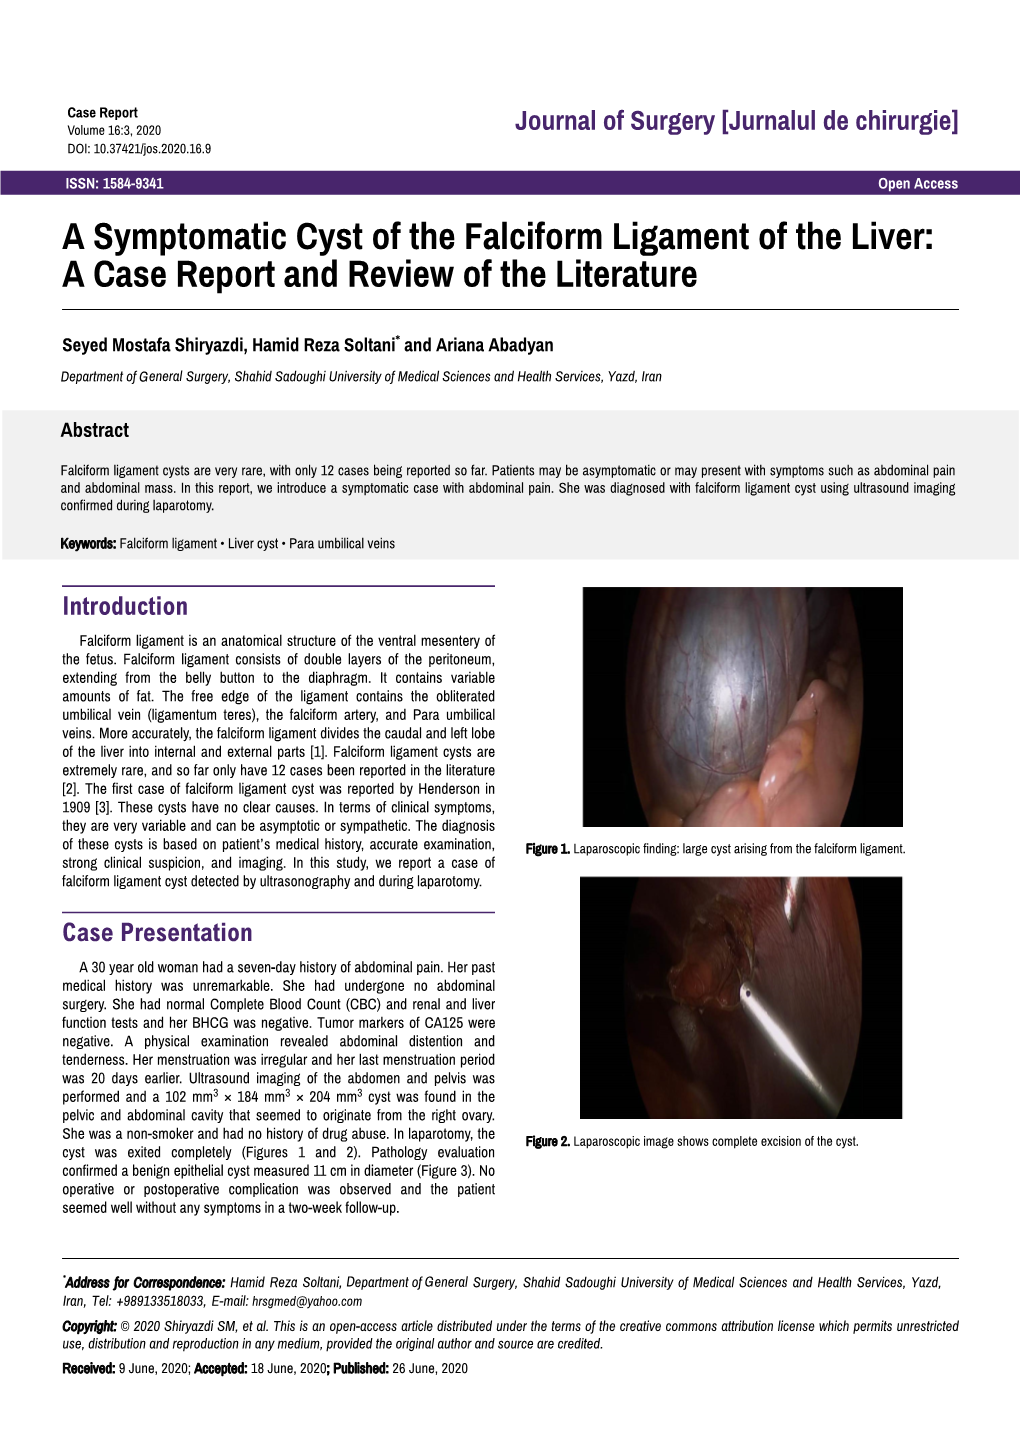 A Symptomatic Cyst of the Falciform Ligament of the Liver: a Case Report and Review of the Literature